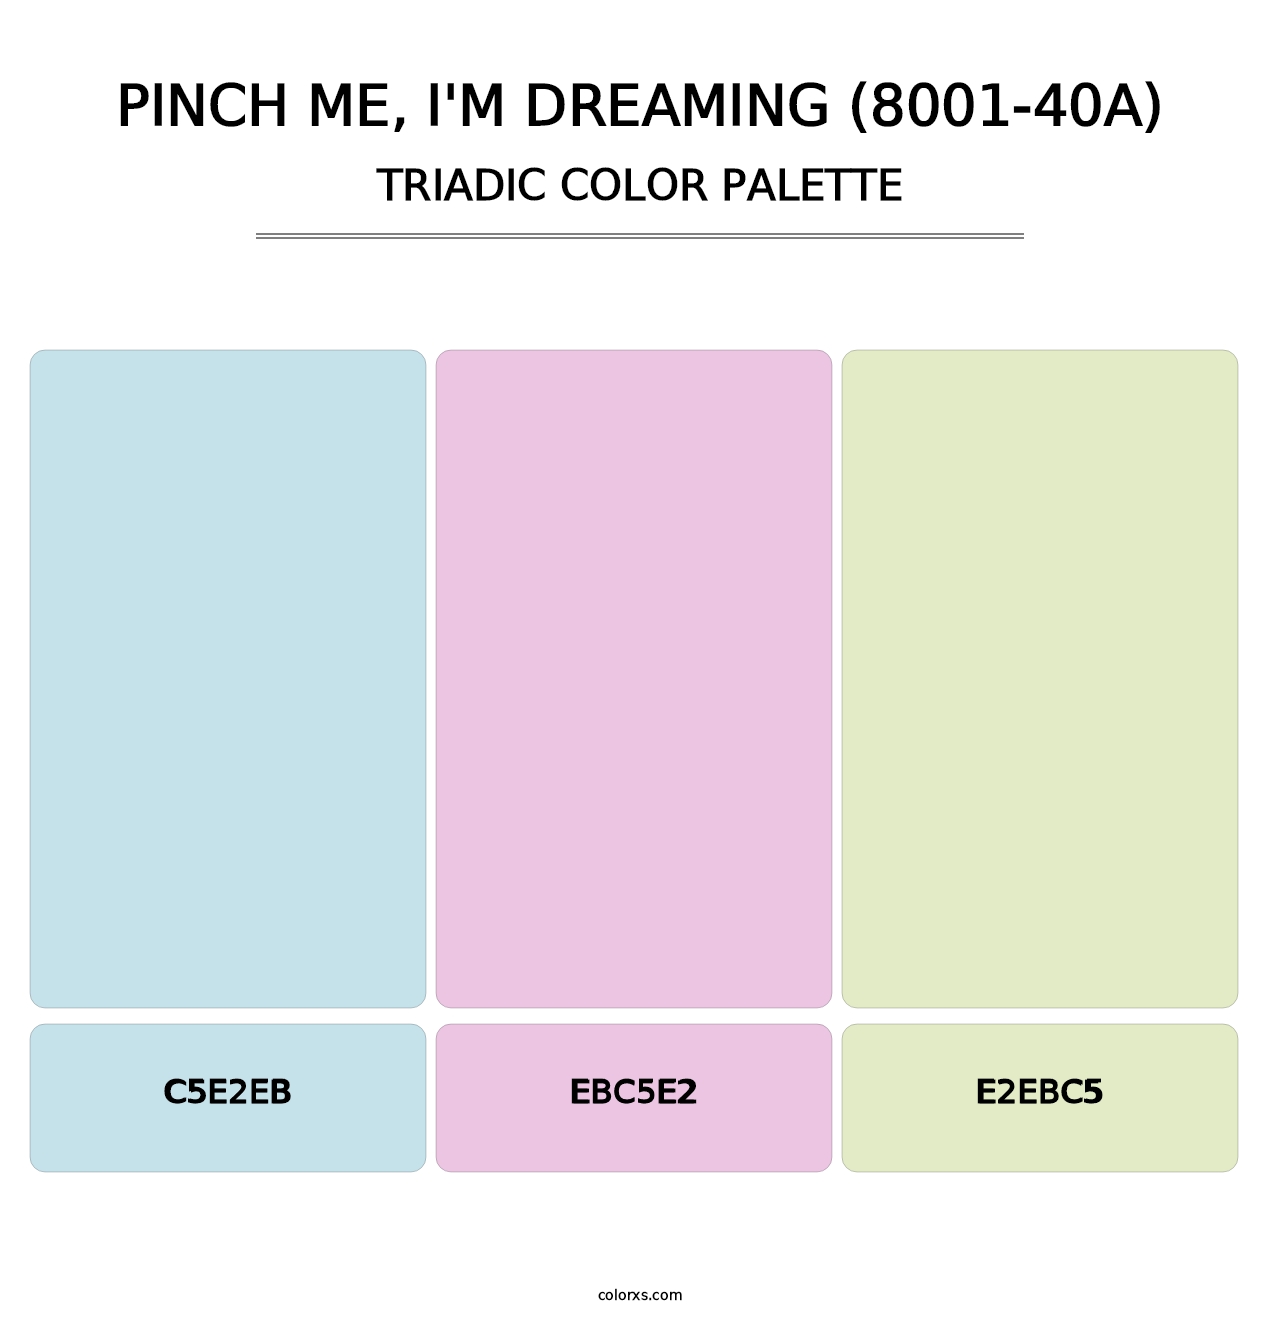 Pinch Me, I'm Dreaming (8001-40A) - Triadic Color Palette